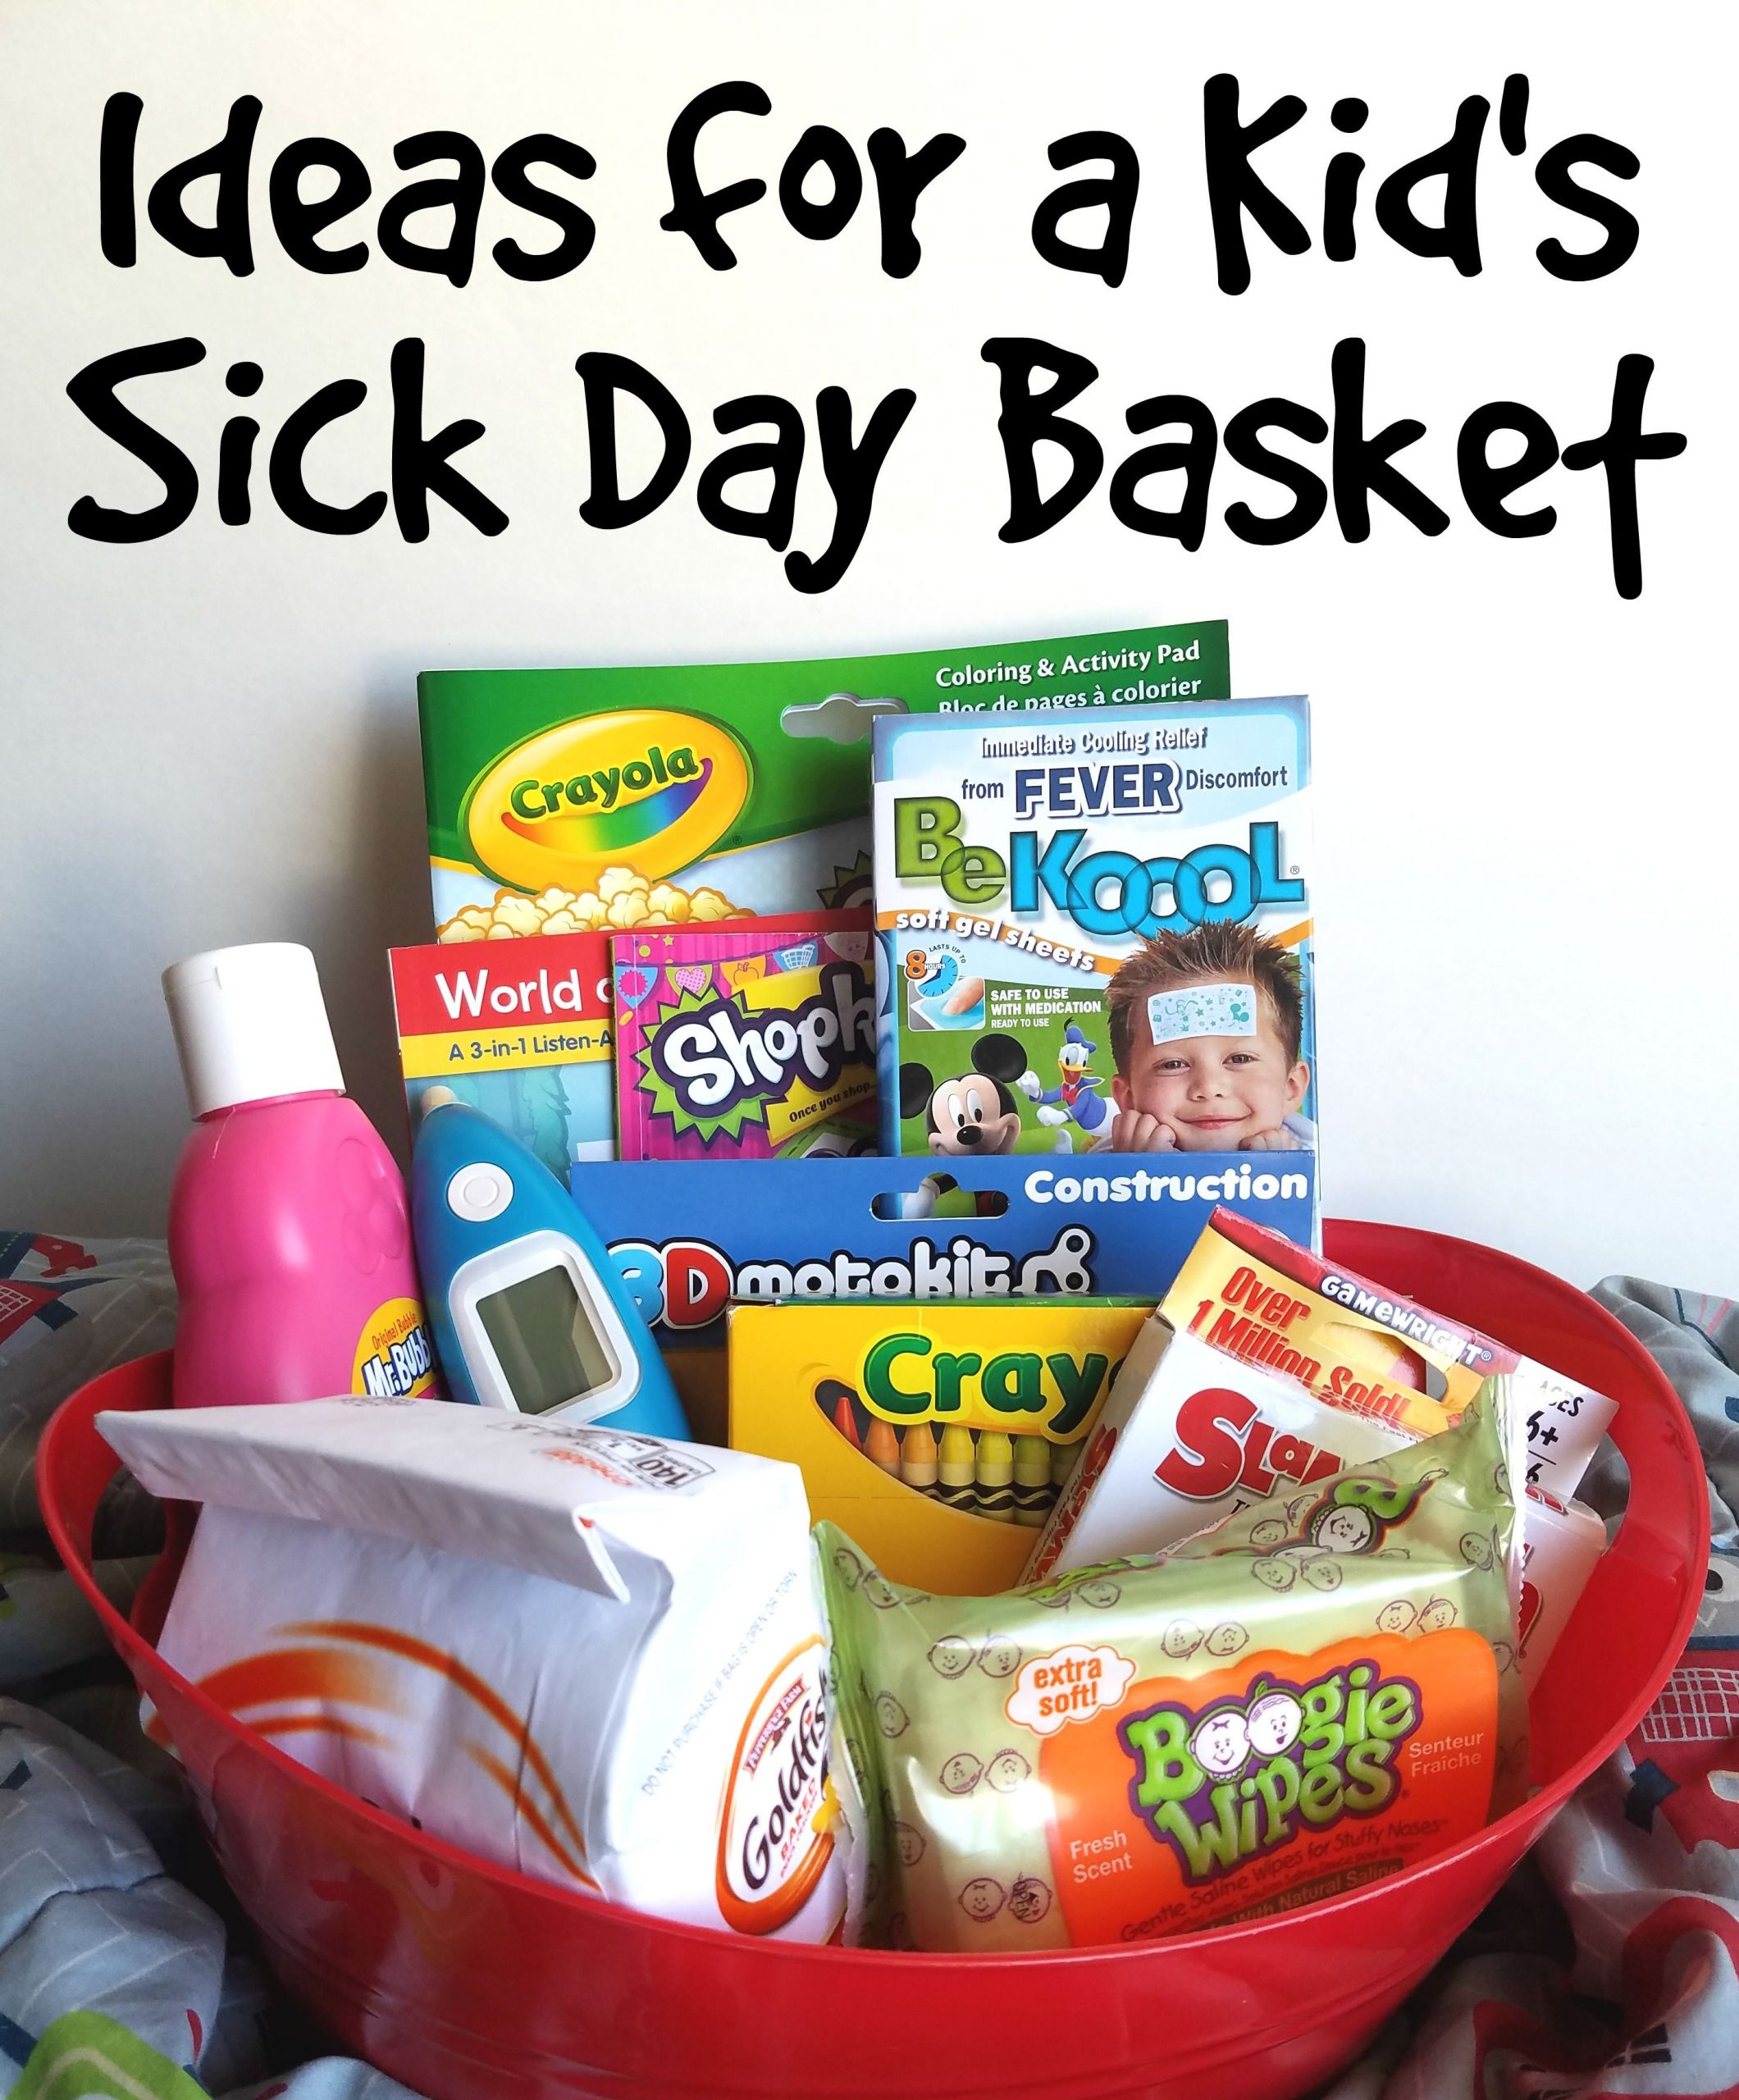 Child Get Well Gift Baskets
 Sick Day Basket For Kids